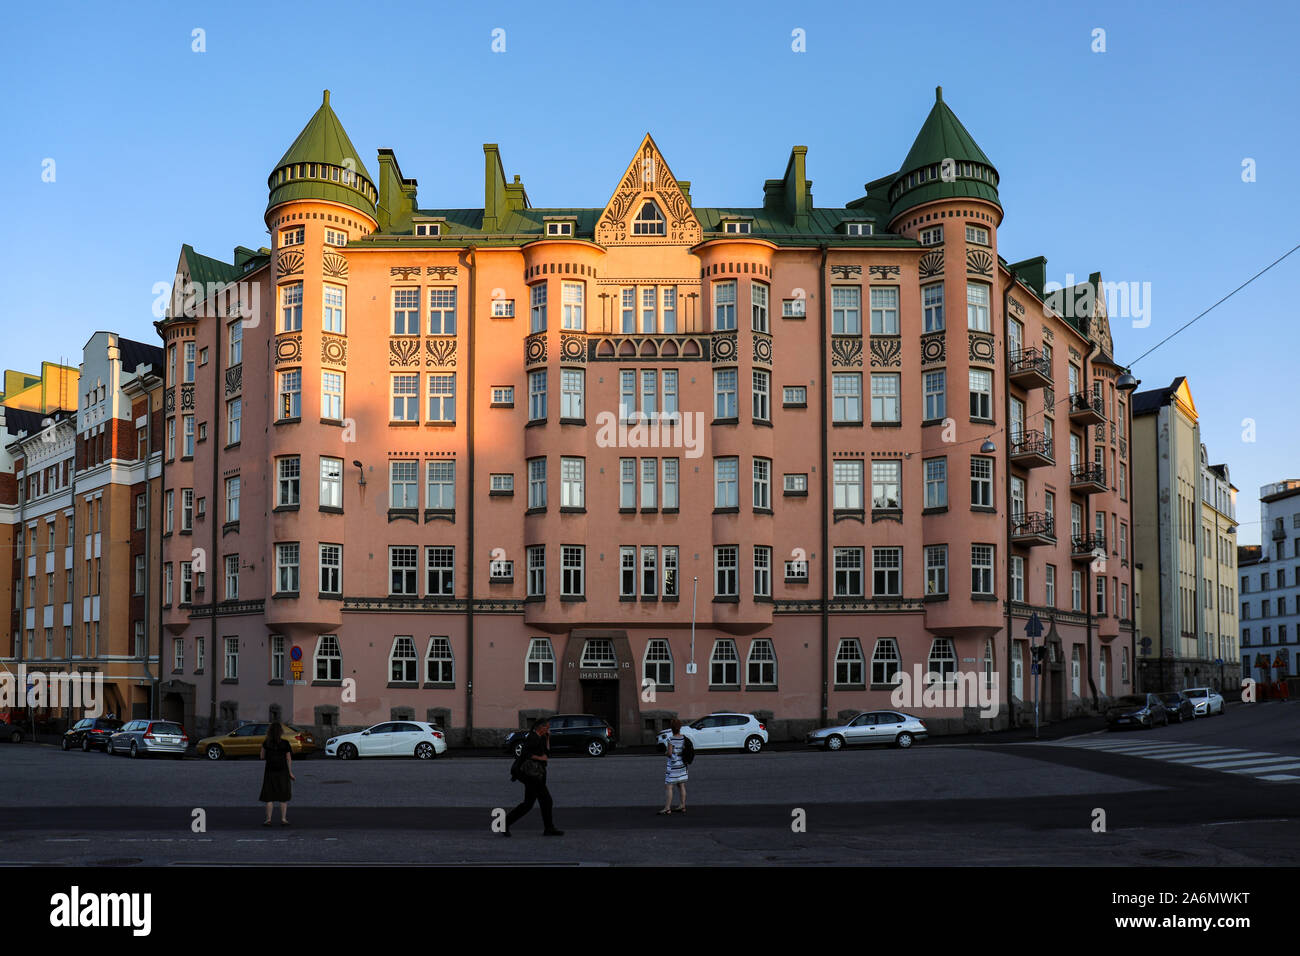 Ihantola, Jugend-style residential building in Kallio district of Helsinki, Finland. Designed by architect O. E. Koskinen  and built in 1907. Stock Photo